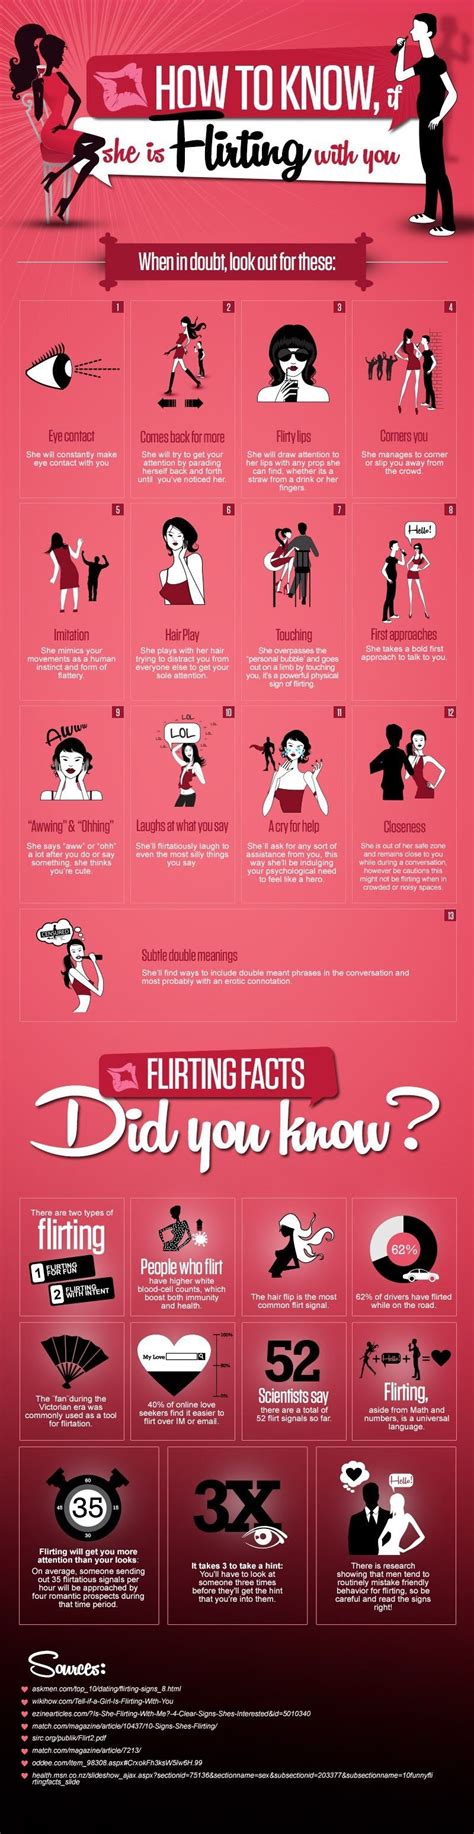 What are the signs of flirting?